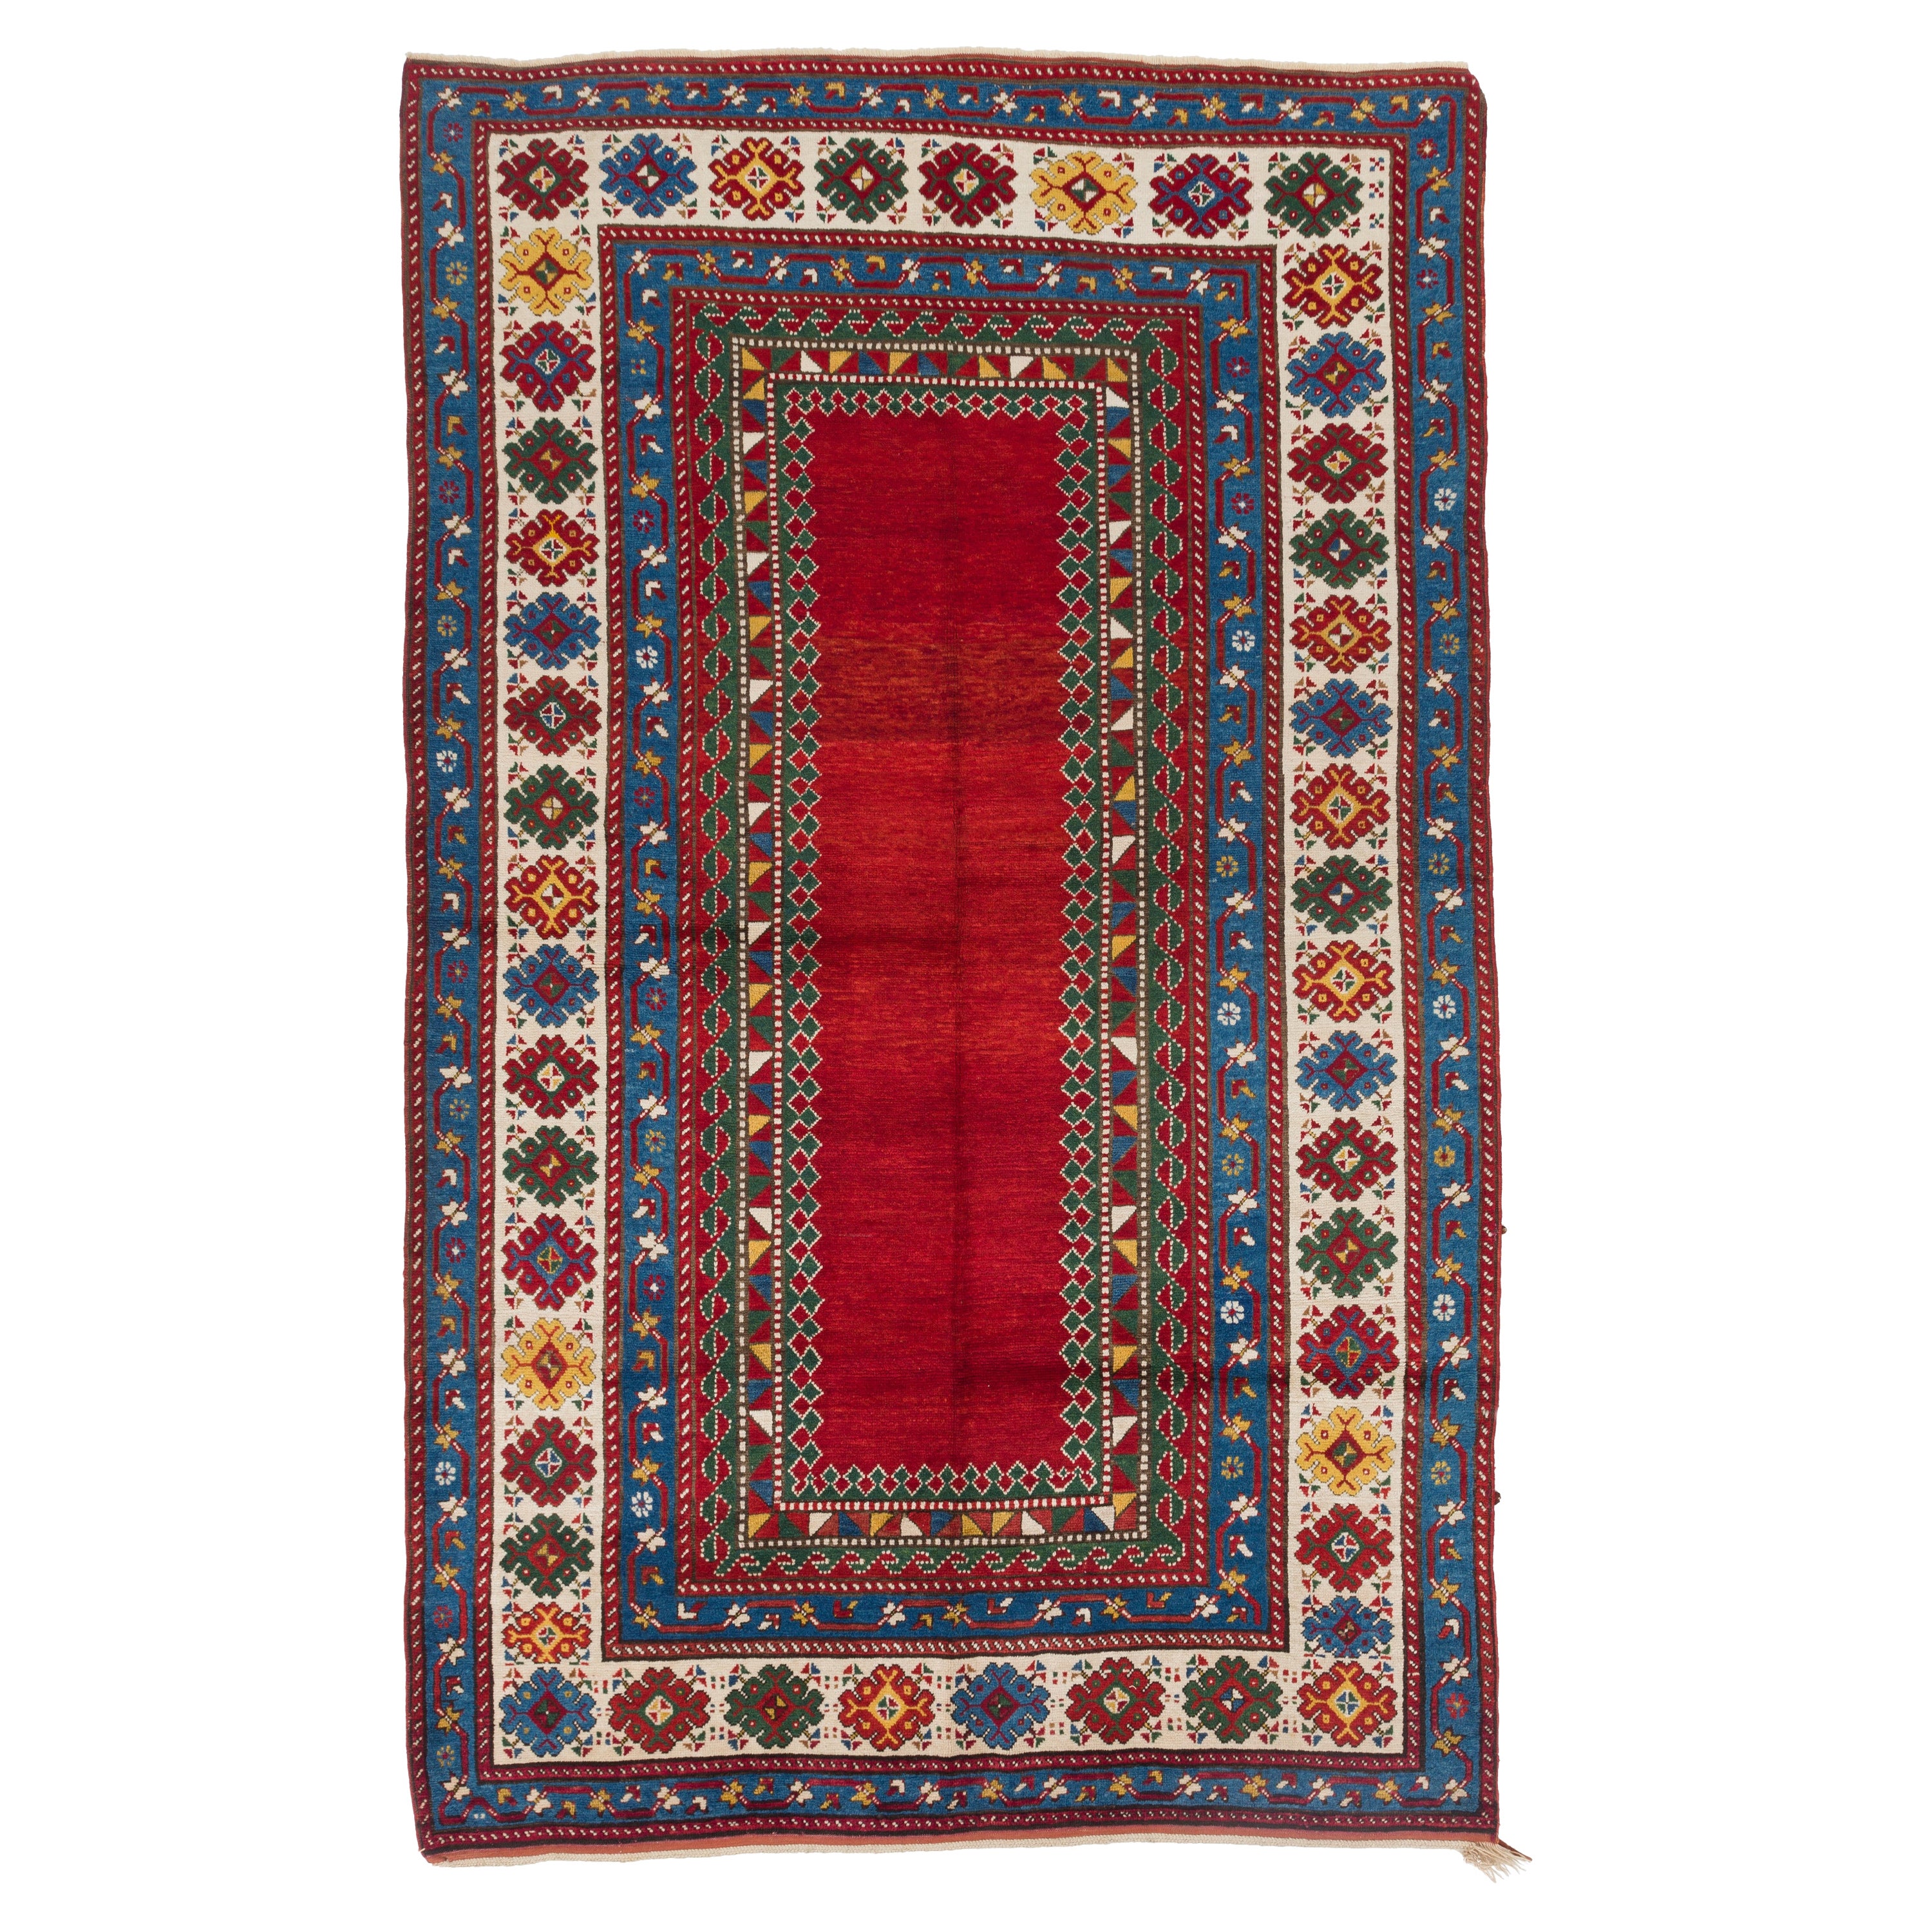 5.9x9.3 ft Antique Caucasian Kazak Rug, Ca 1880, 100% Wool and Natural Dyes